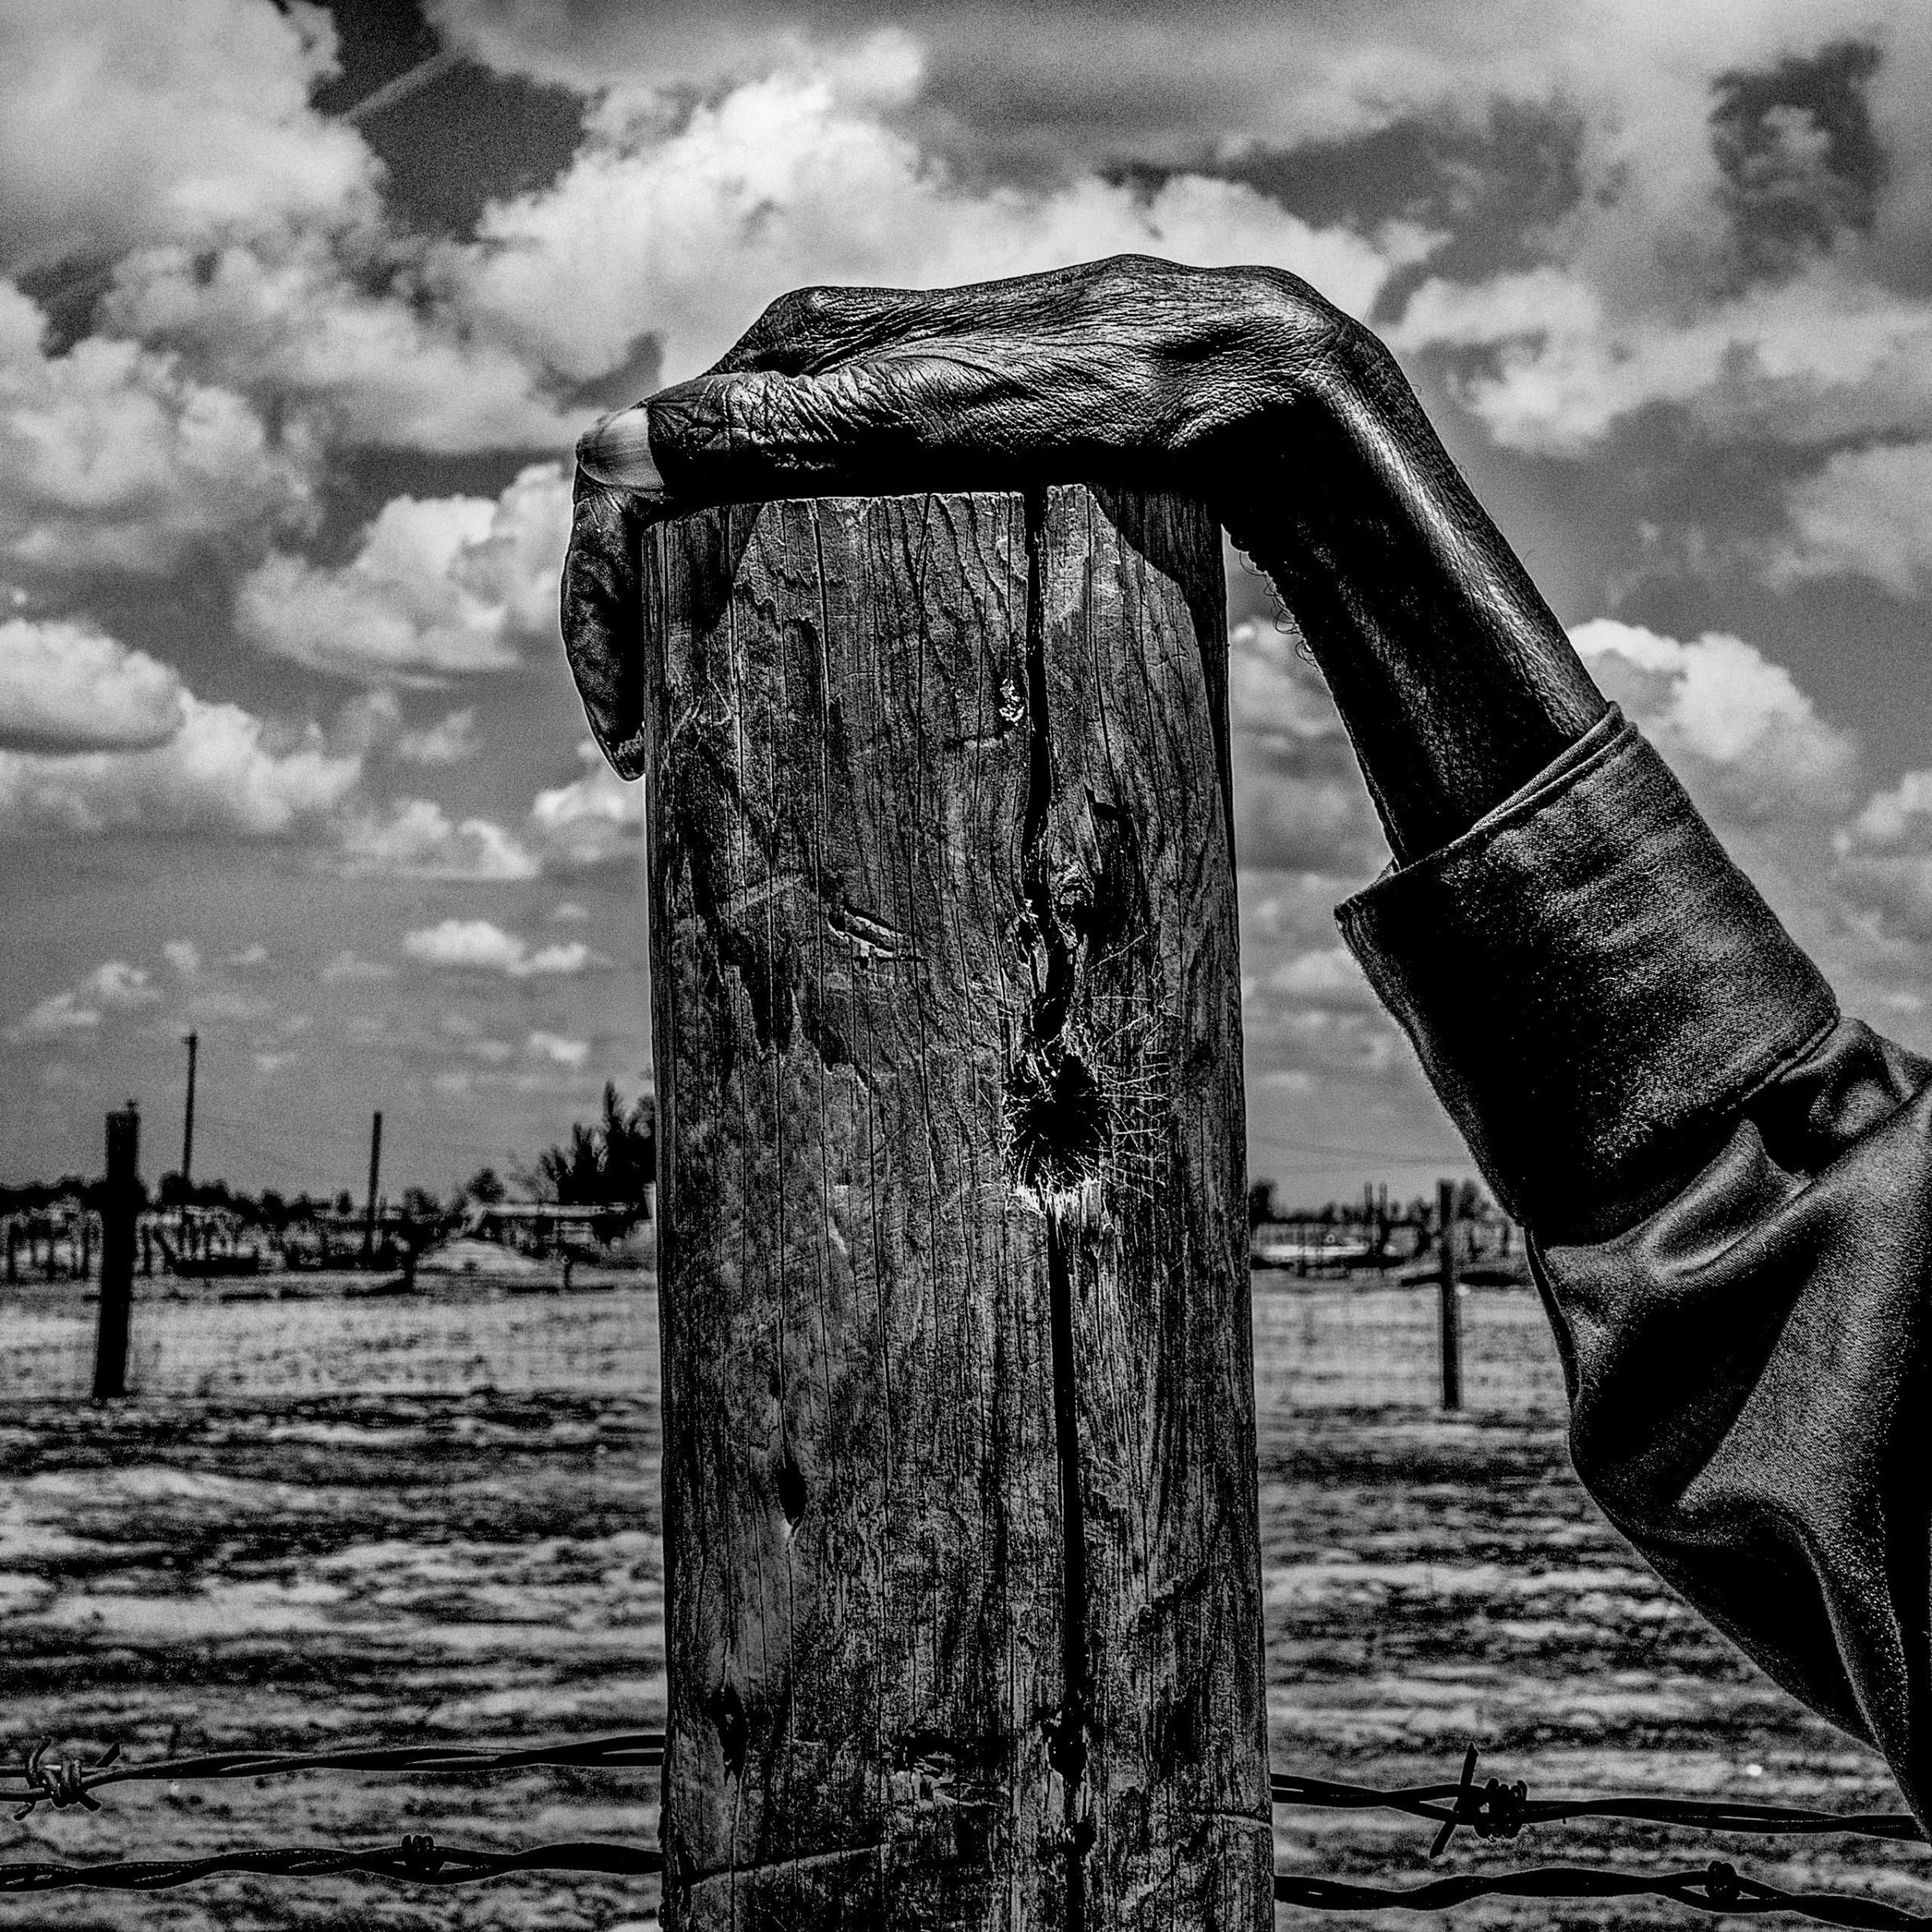 Fence post. Allensworth, CA. 35°51'53"N 119°23'21"W #geographyofpovertyAllensworth is a community in Tulare County, California, United States. The population was 471 at the 2010 census. Residents have a $7,274 per capita income and 54% live below the poverty level. Allensworth was a once all black town founded 1908 by Col. Allen Allensworth, an ex-slave and Buffalo Soldier. The self sufficient community he envisioned foundered for lack of water and protracted land disputes with the Santa Fe railroad. www.geographyofpoverty.com